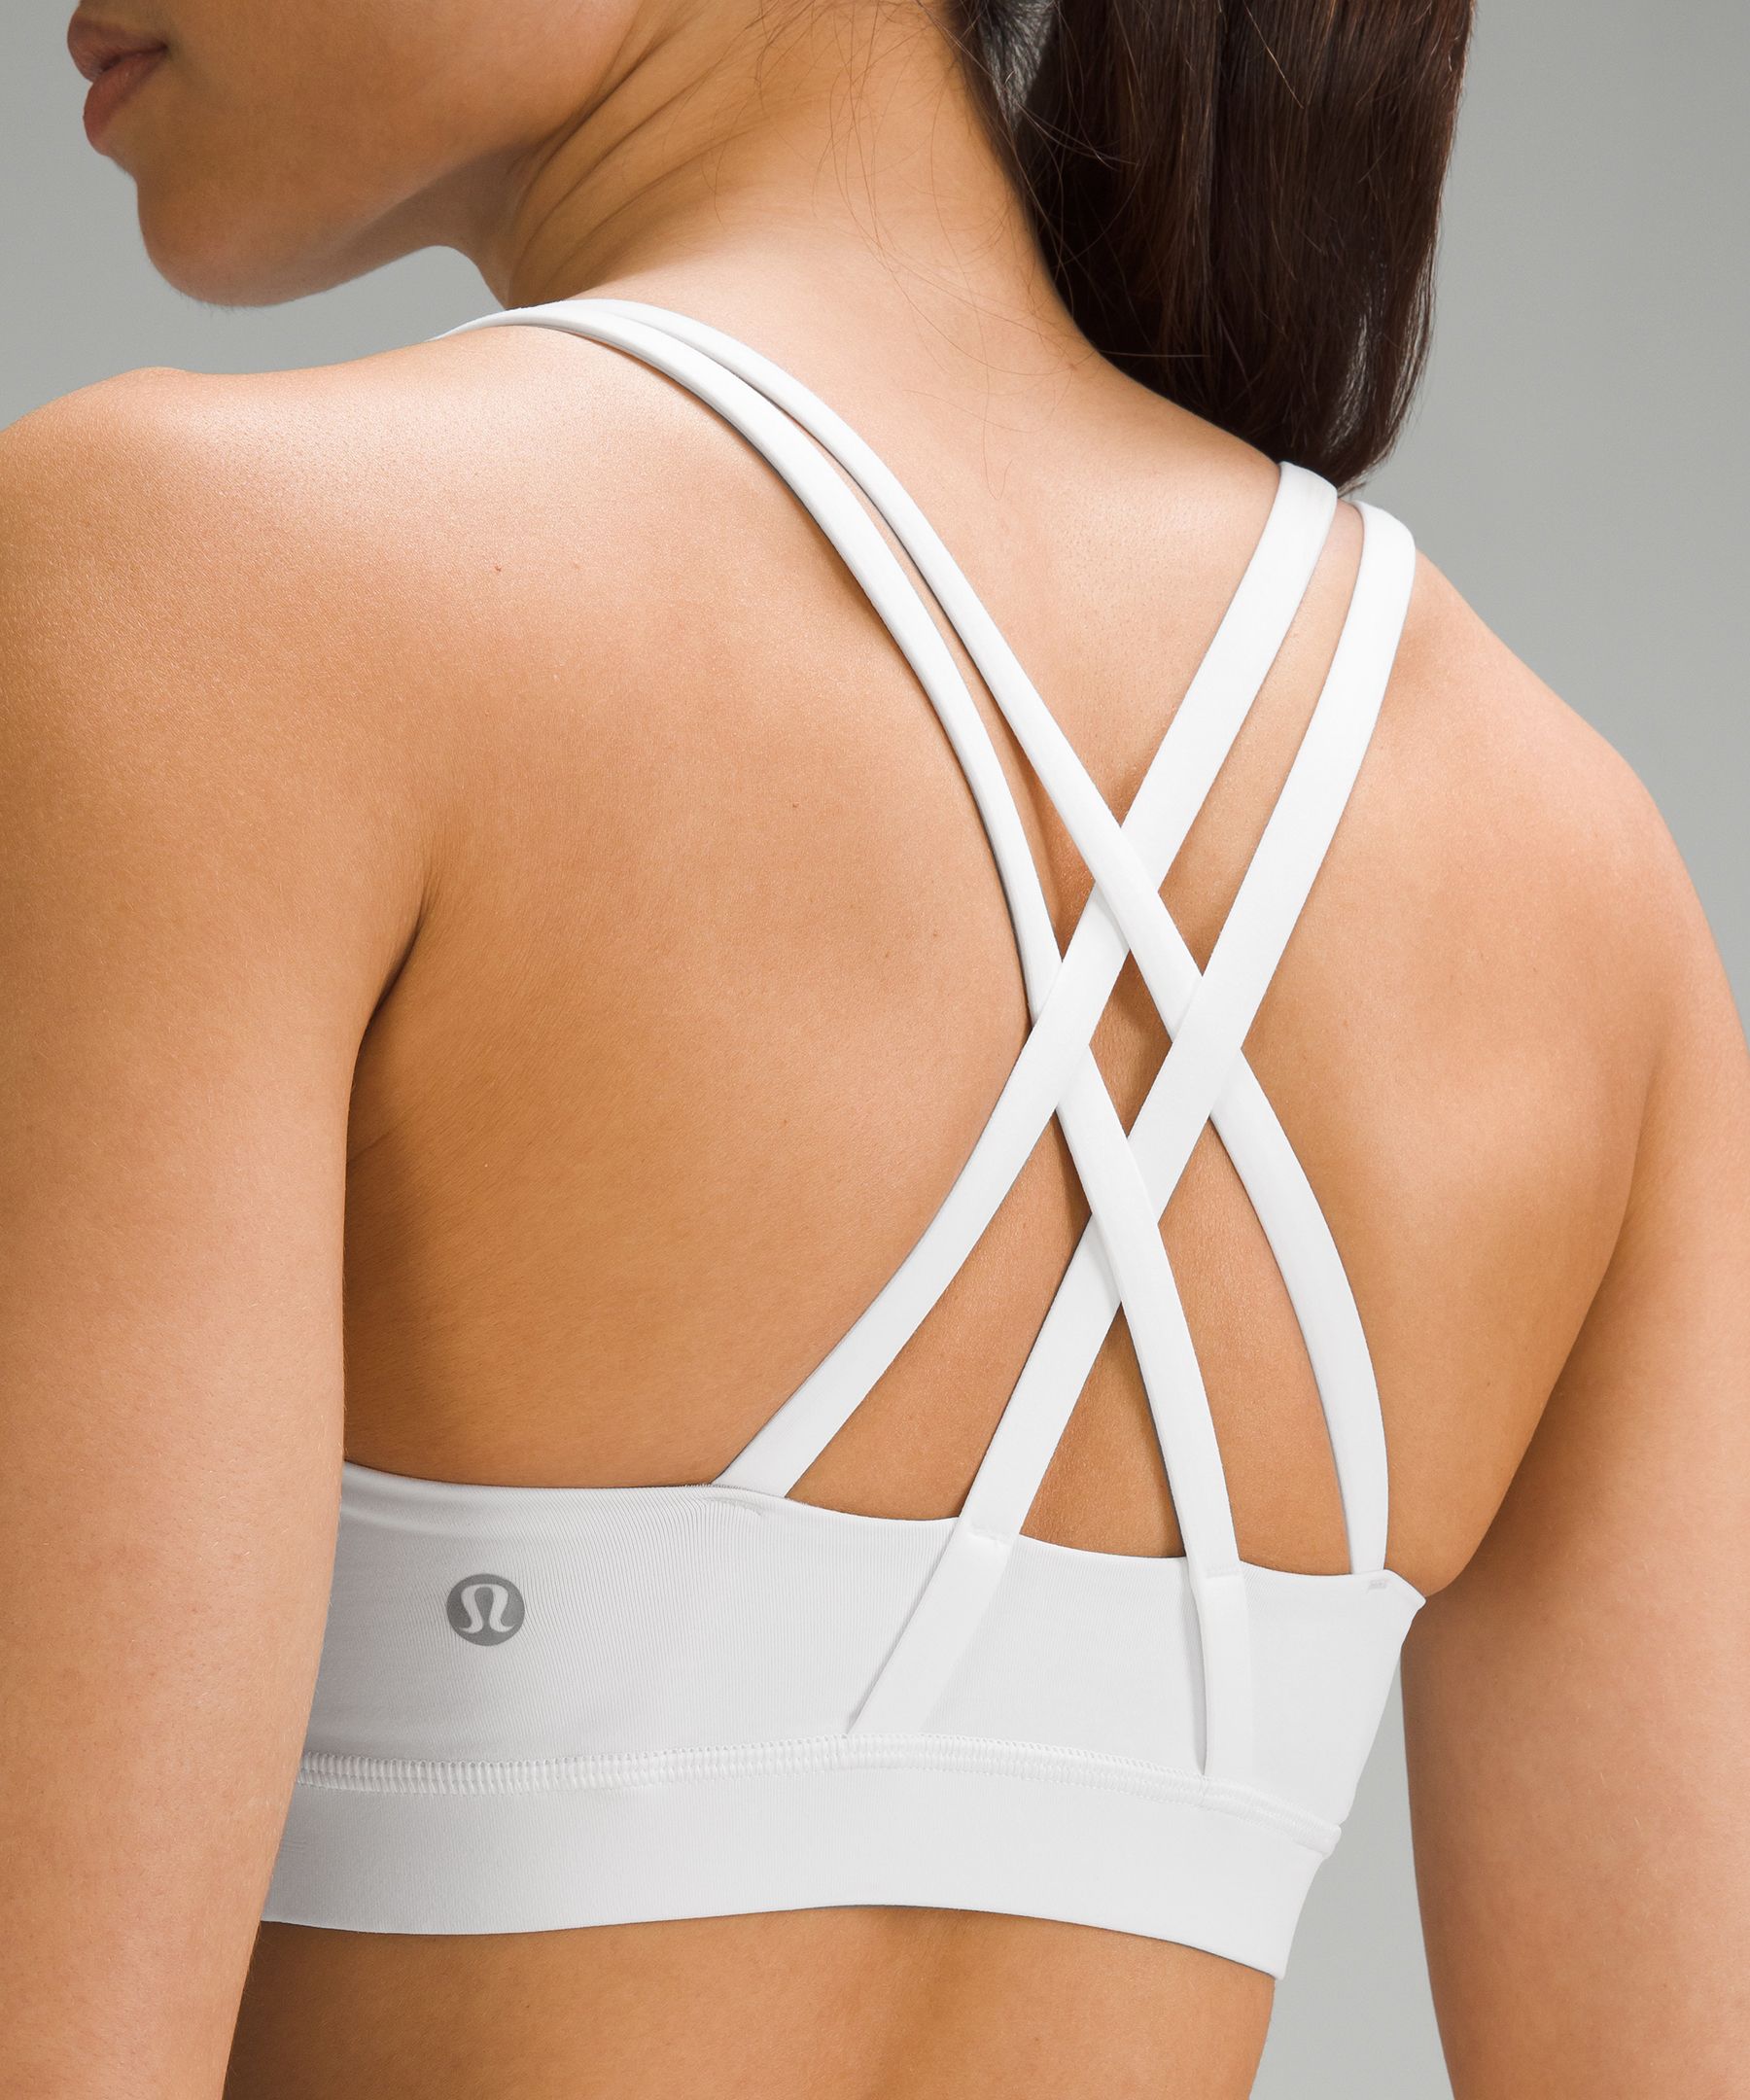 Pin by p a i g e on bg fit  Lululemon energy bra, The selection